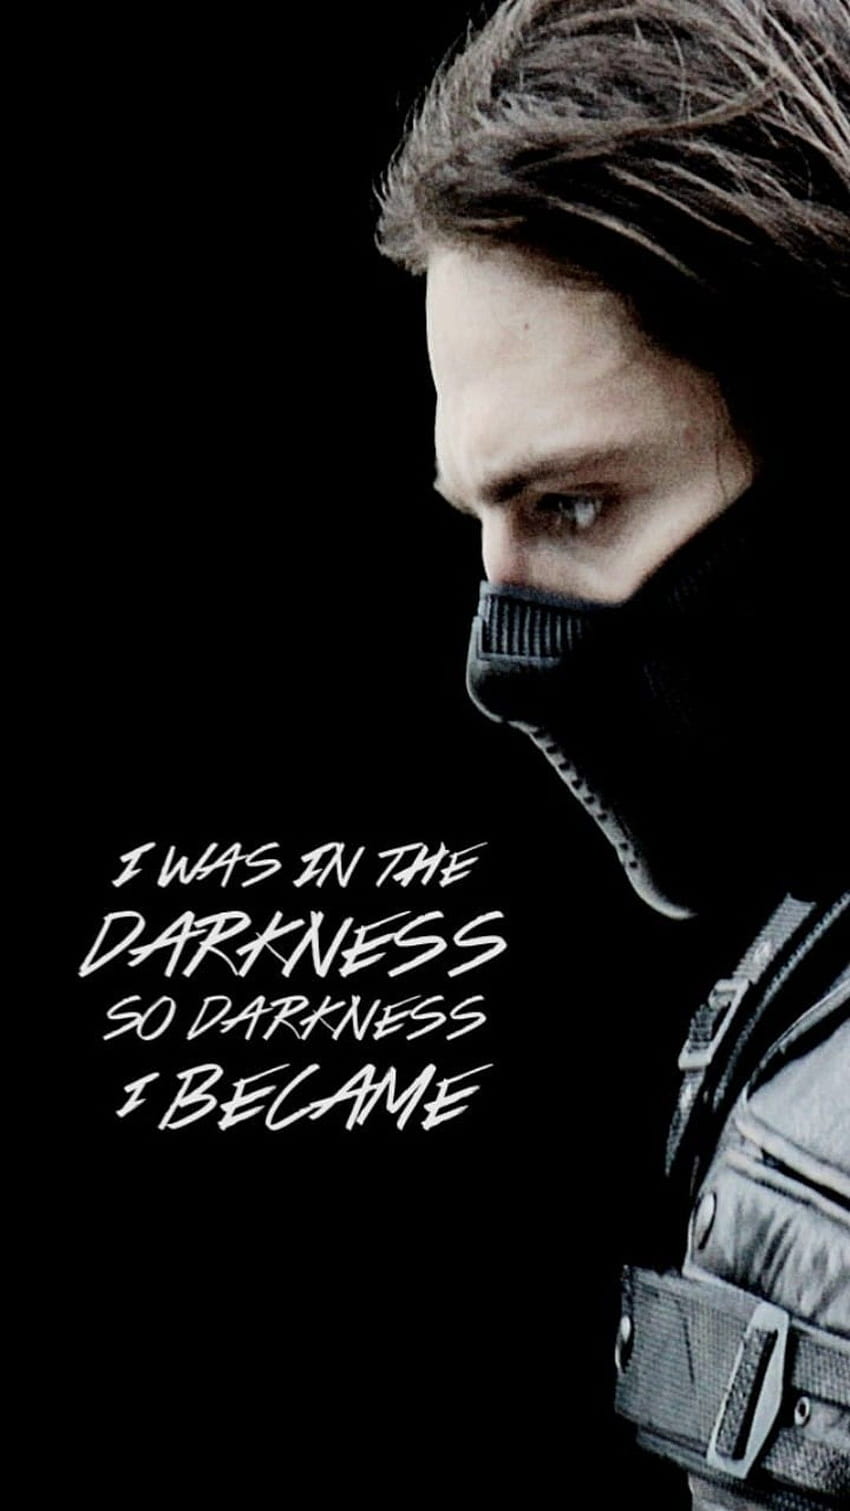 Winter Soldier wallpaper I made for my phone! - Bucky Barnes